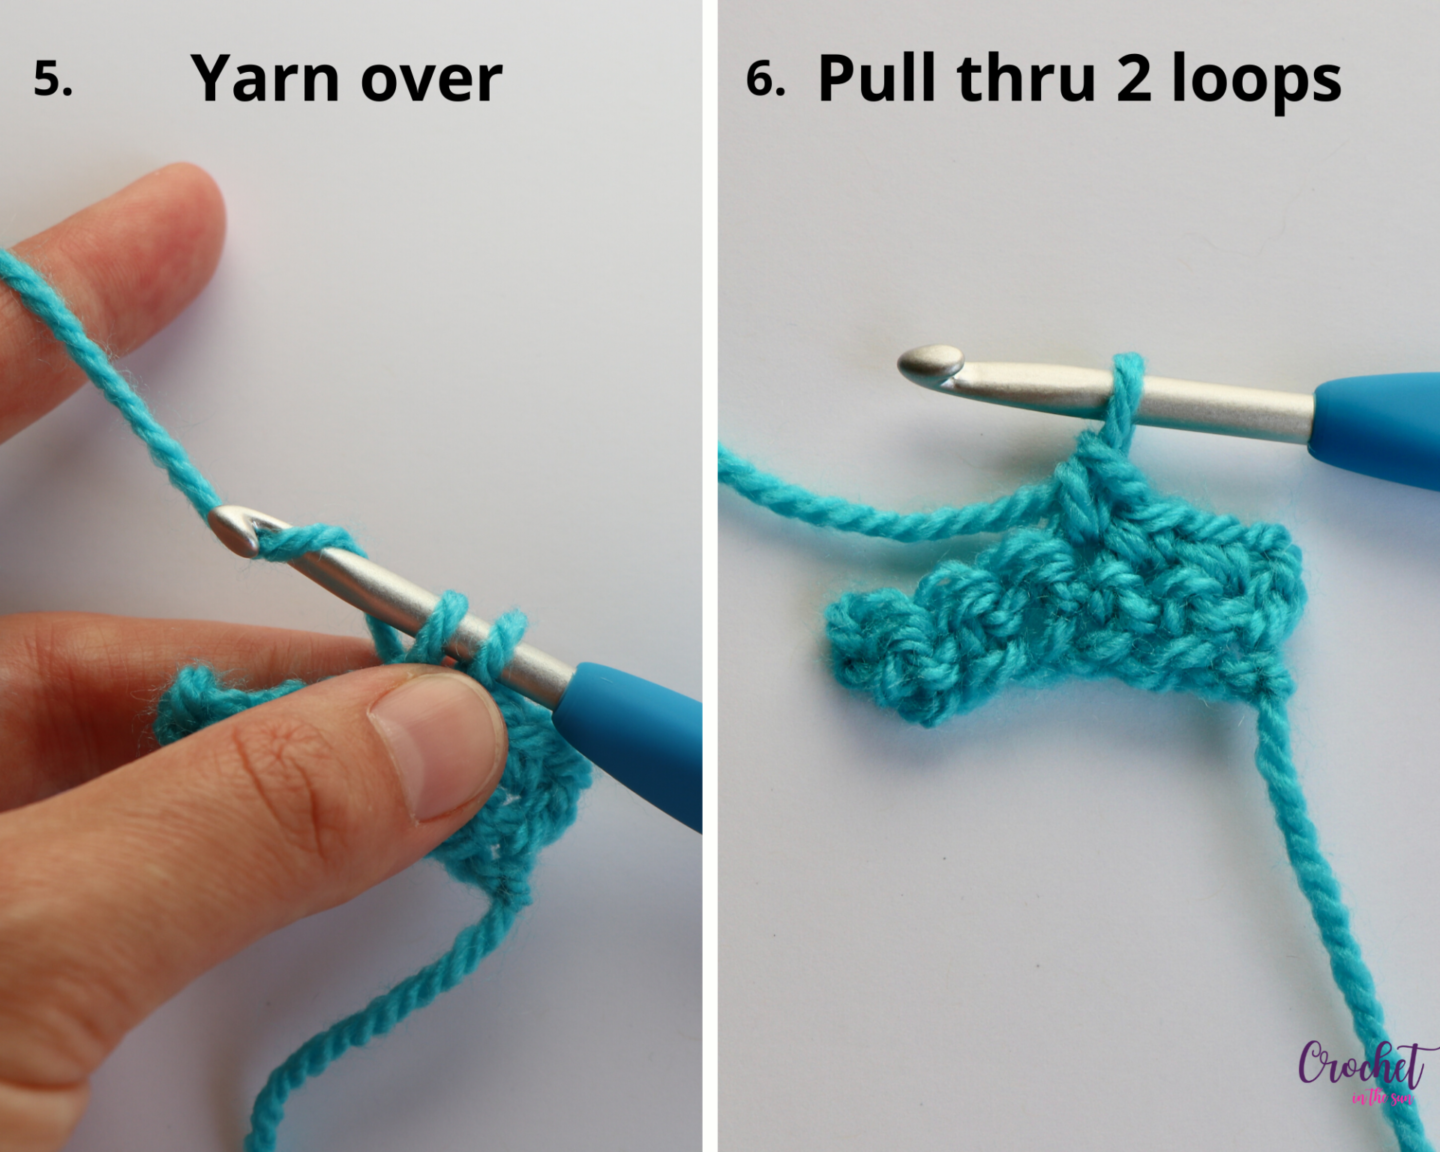 How to crochet - Step by step photo tutorial for the single crochet stitch (sc) steps 5-6. Beginner friendly tutorial. Part of the Ultimate Beginner's Guide to crochet #howtocrochet #crochetforbeginners